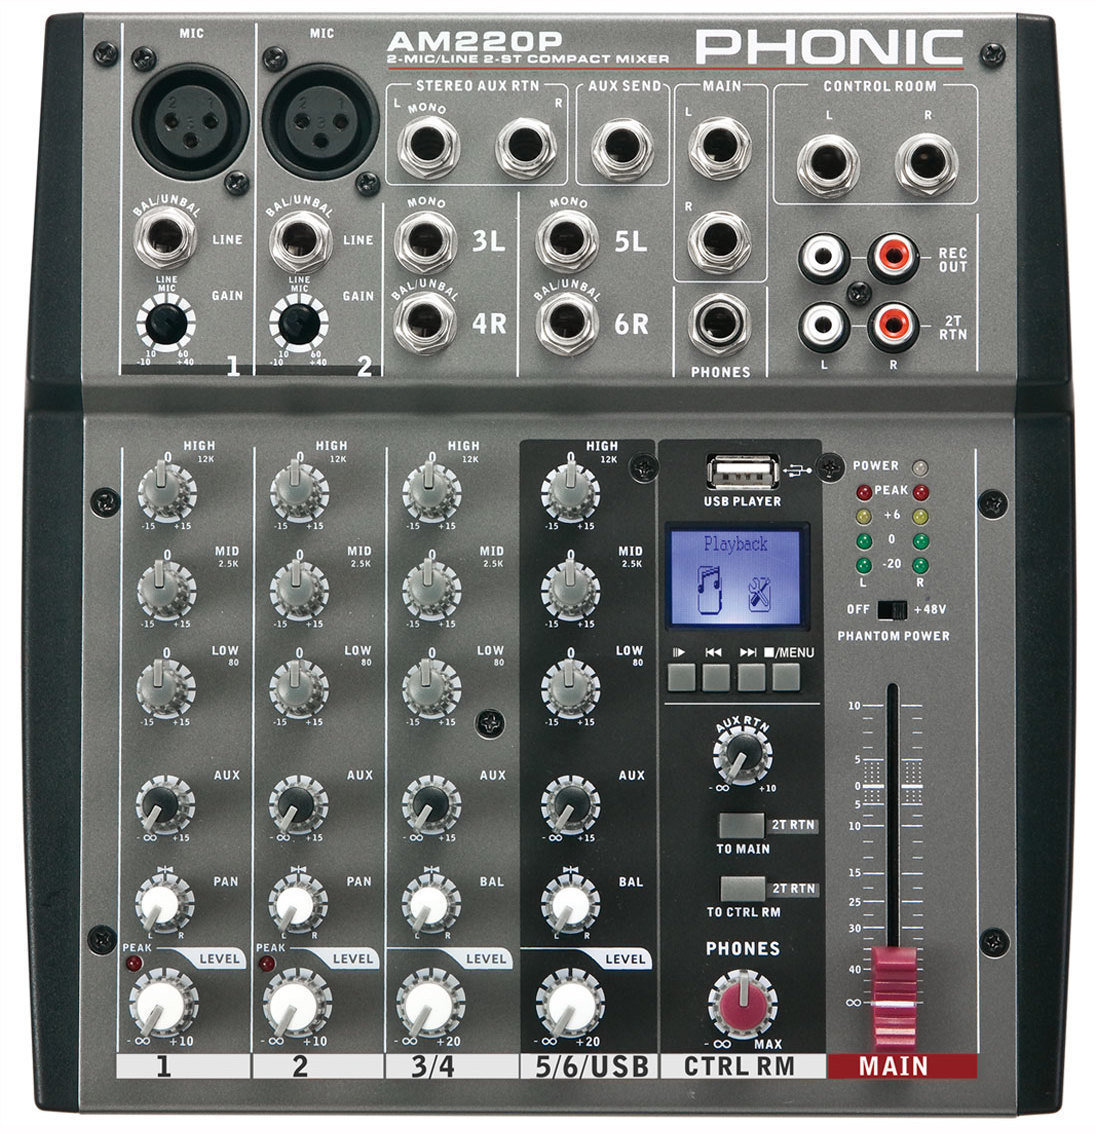 Analoges Mischpult Phonic AM220P